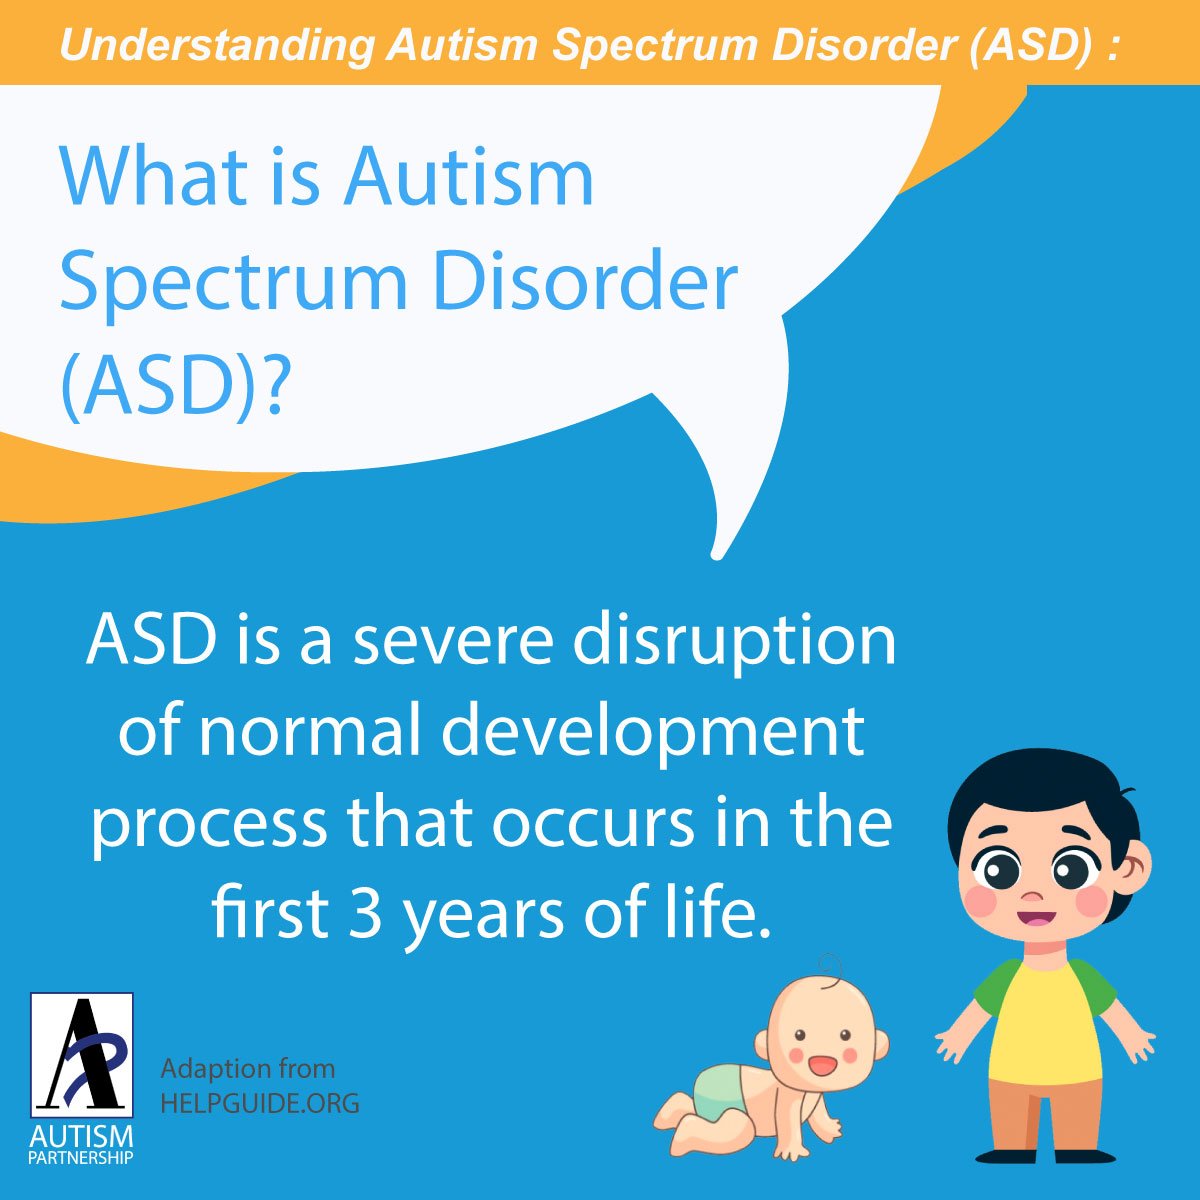 What is Autism Spectrum Disorder (ASD)?